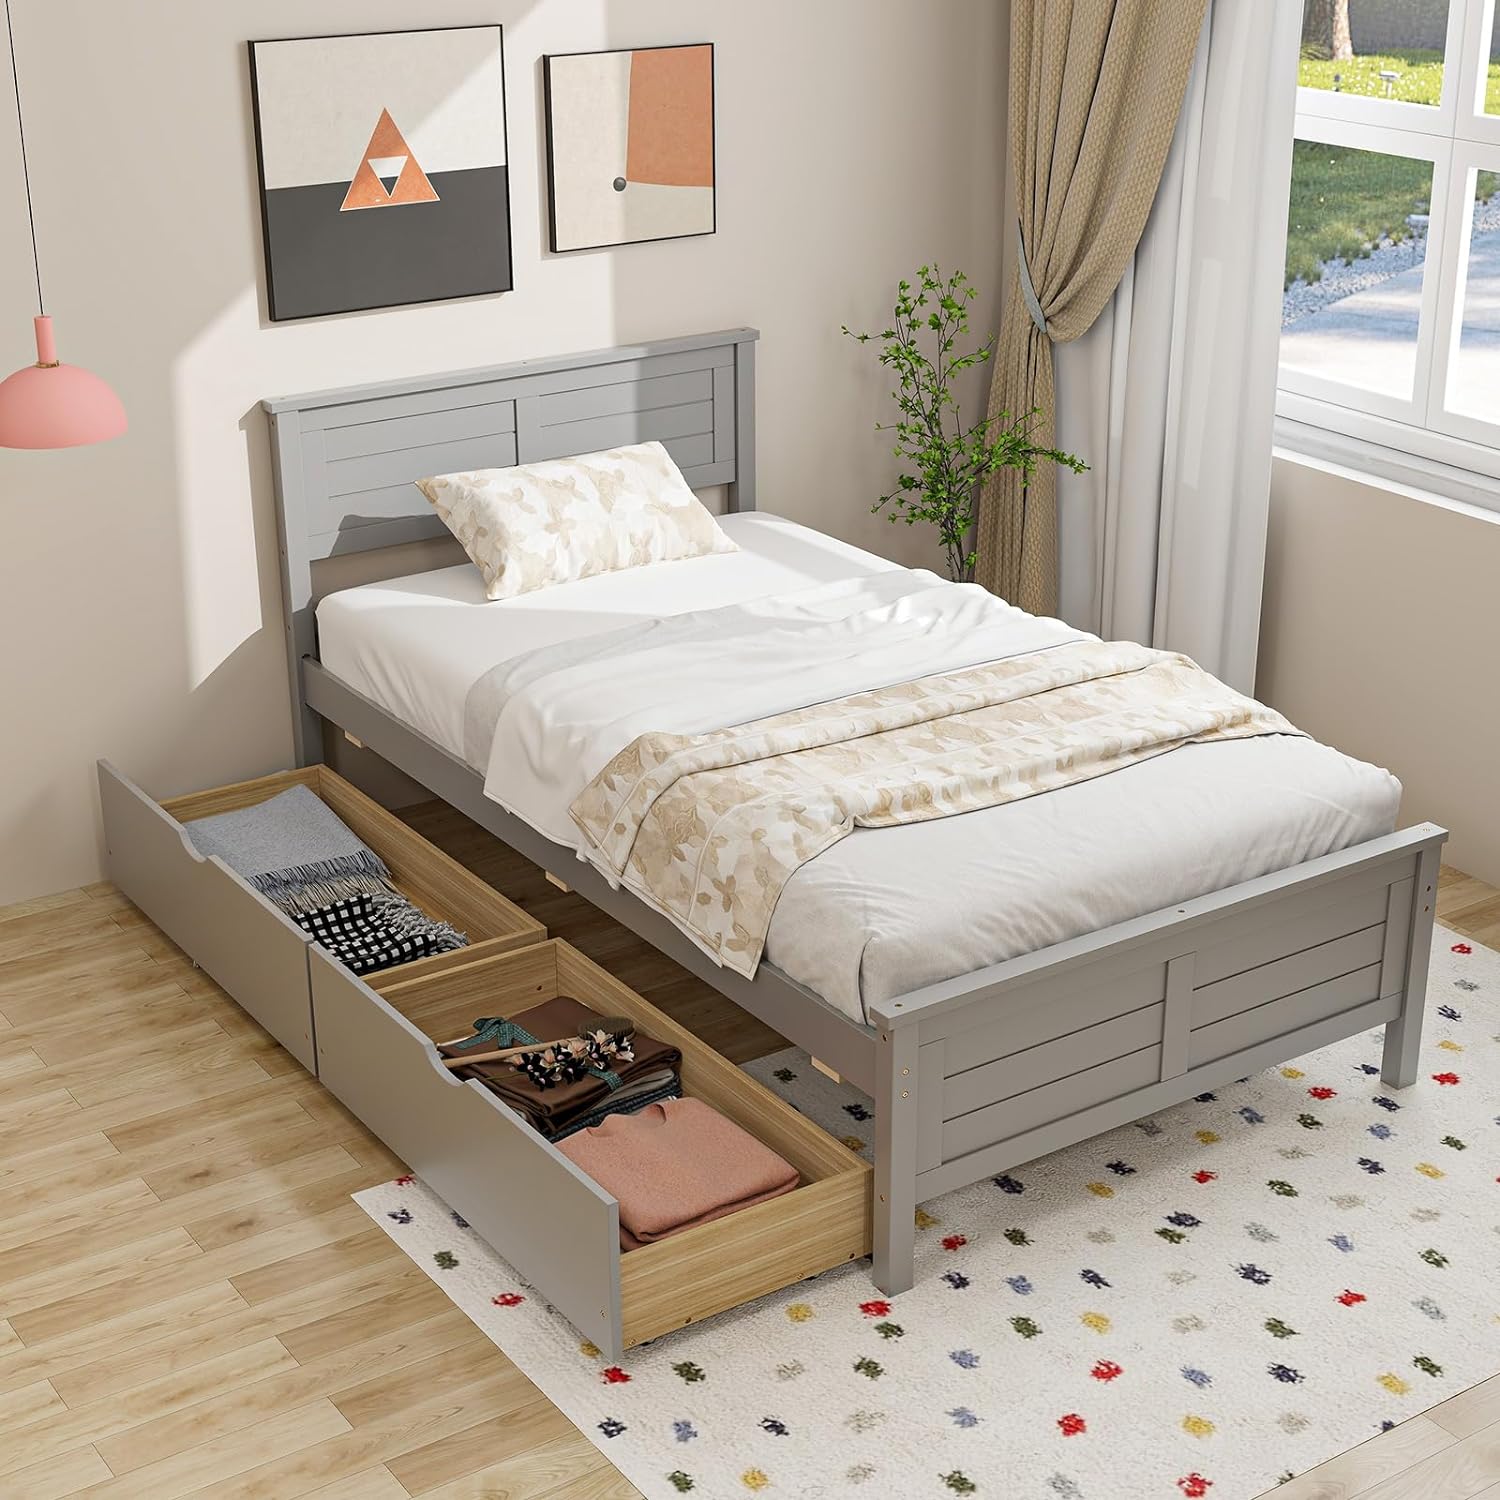 Giantex Wood Full Size Bed Frame with 2 Storage Drawers, Solid Wood Platform Bed with Headboard